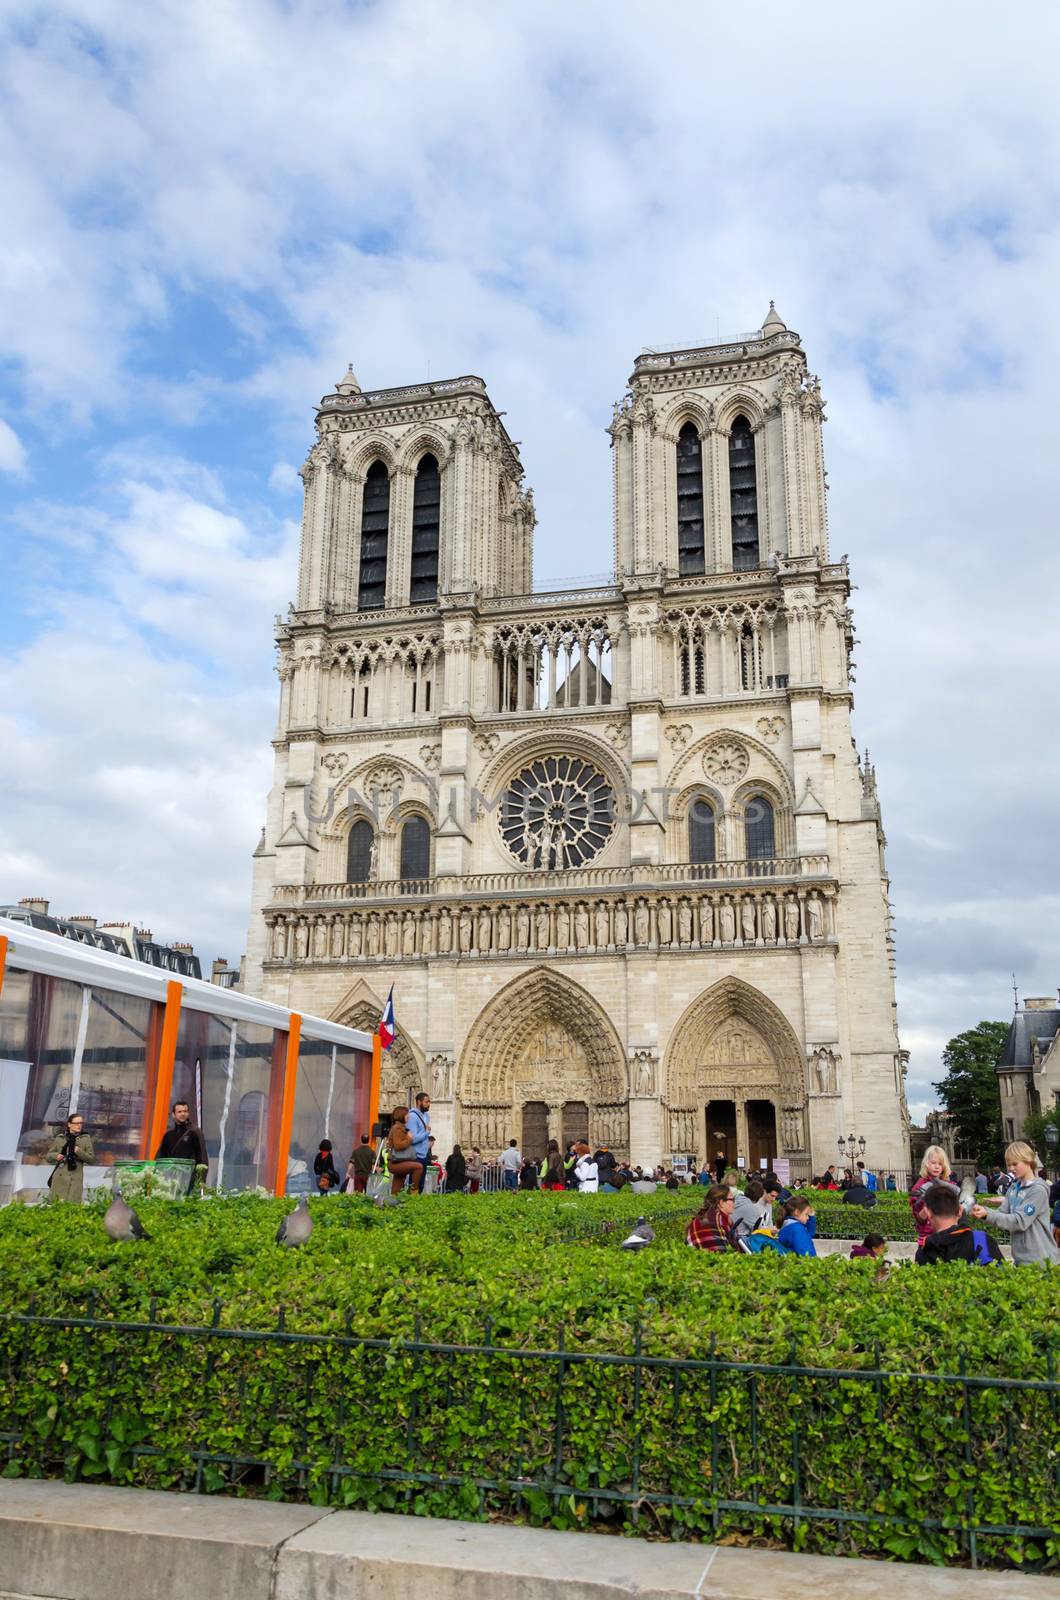 Paris, France - May 14, 2015: Tourists visiting the Cathedral of Notre Dame in Paris, France. on May 14, 2015. Notre Dame is one of the top tourist destinations in Paris.